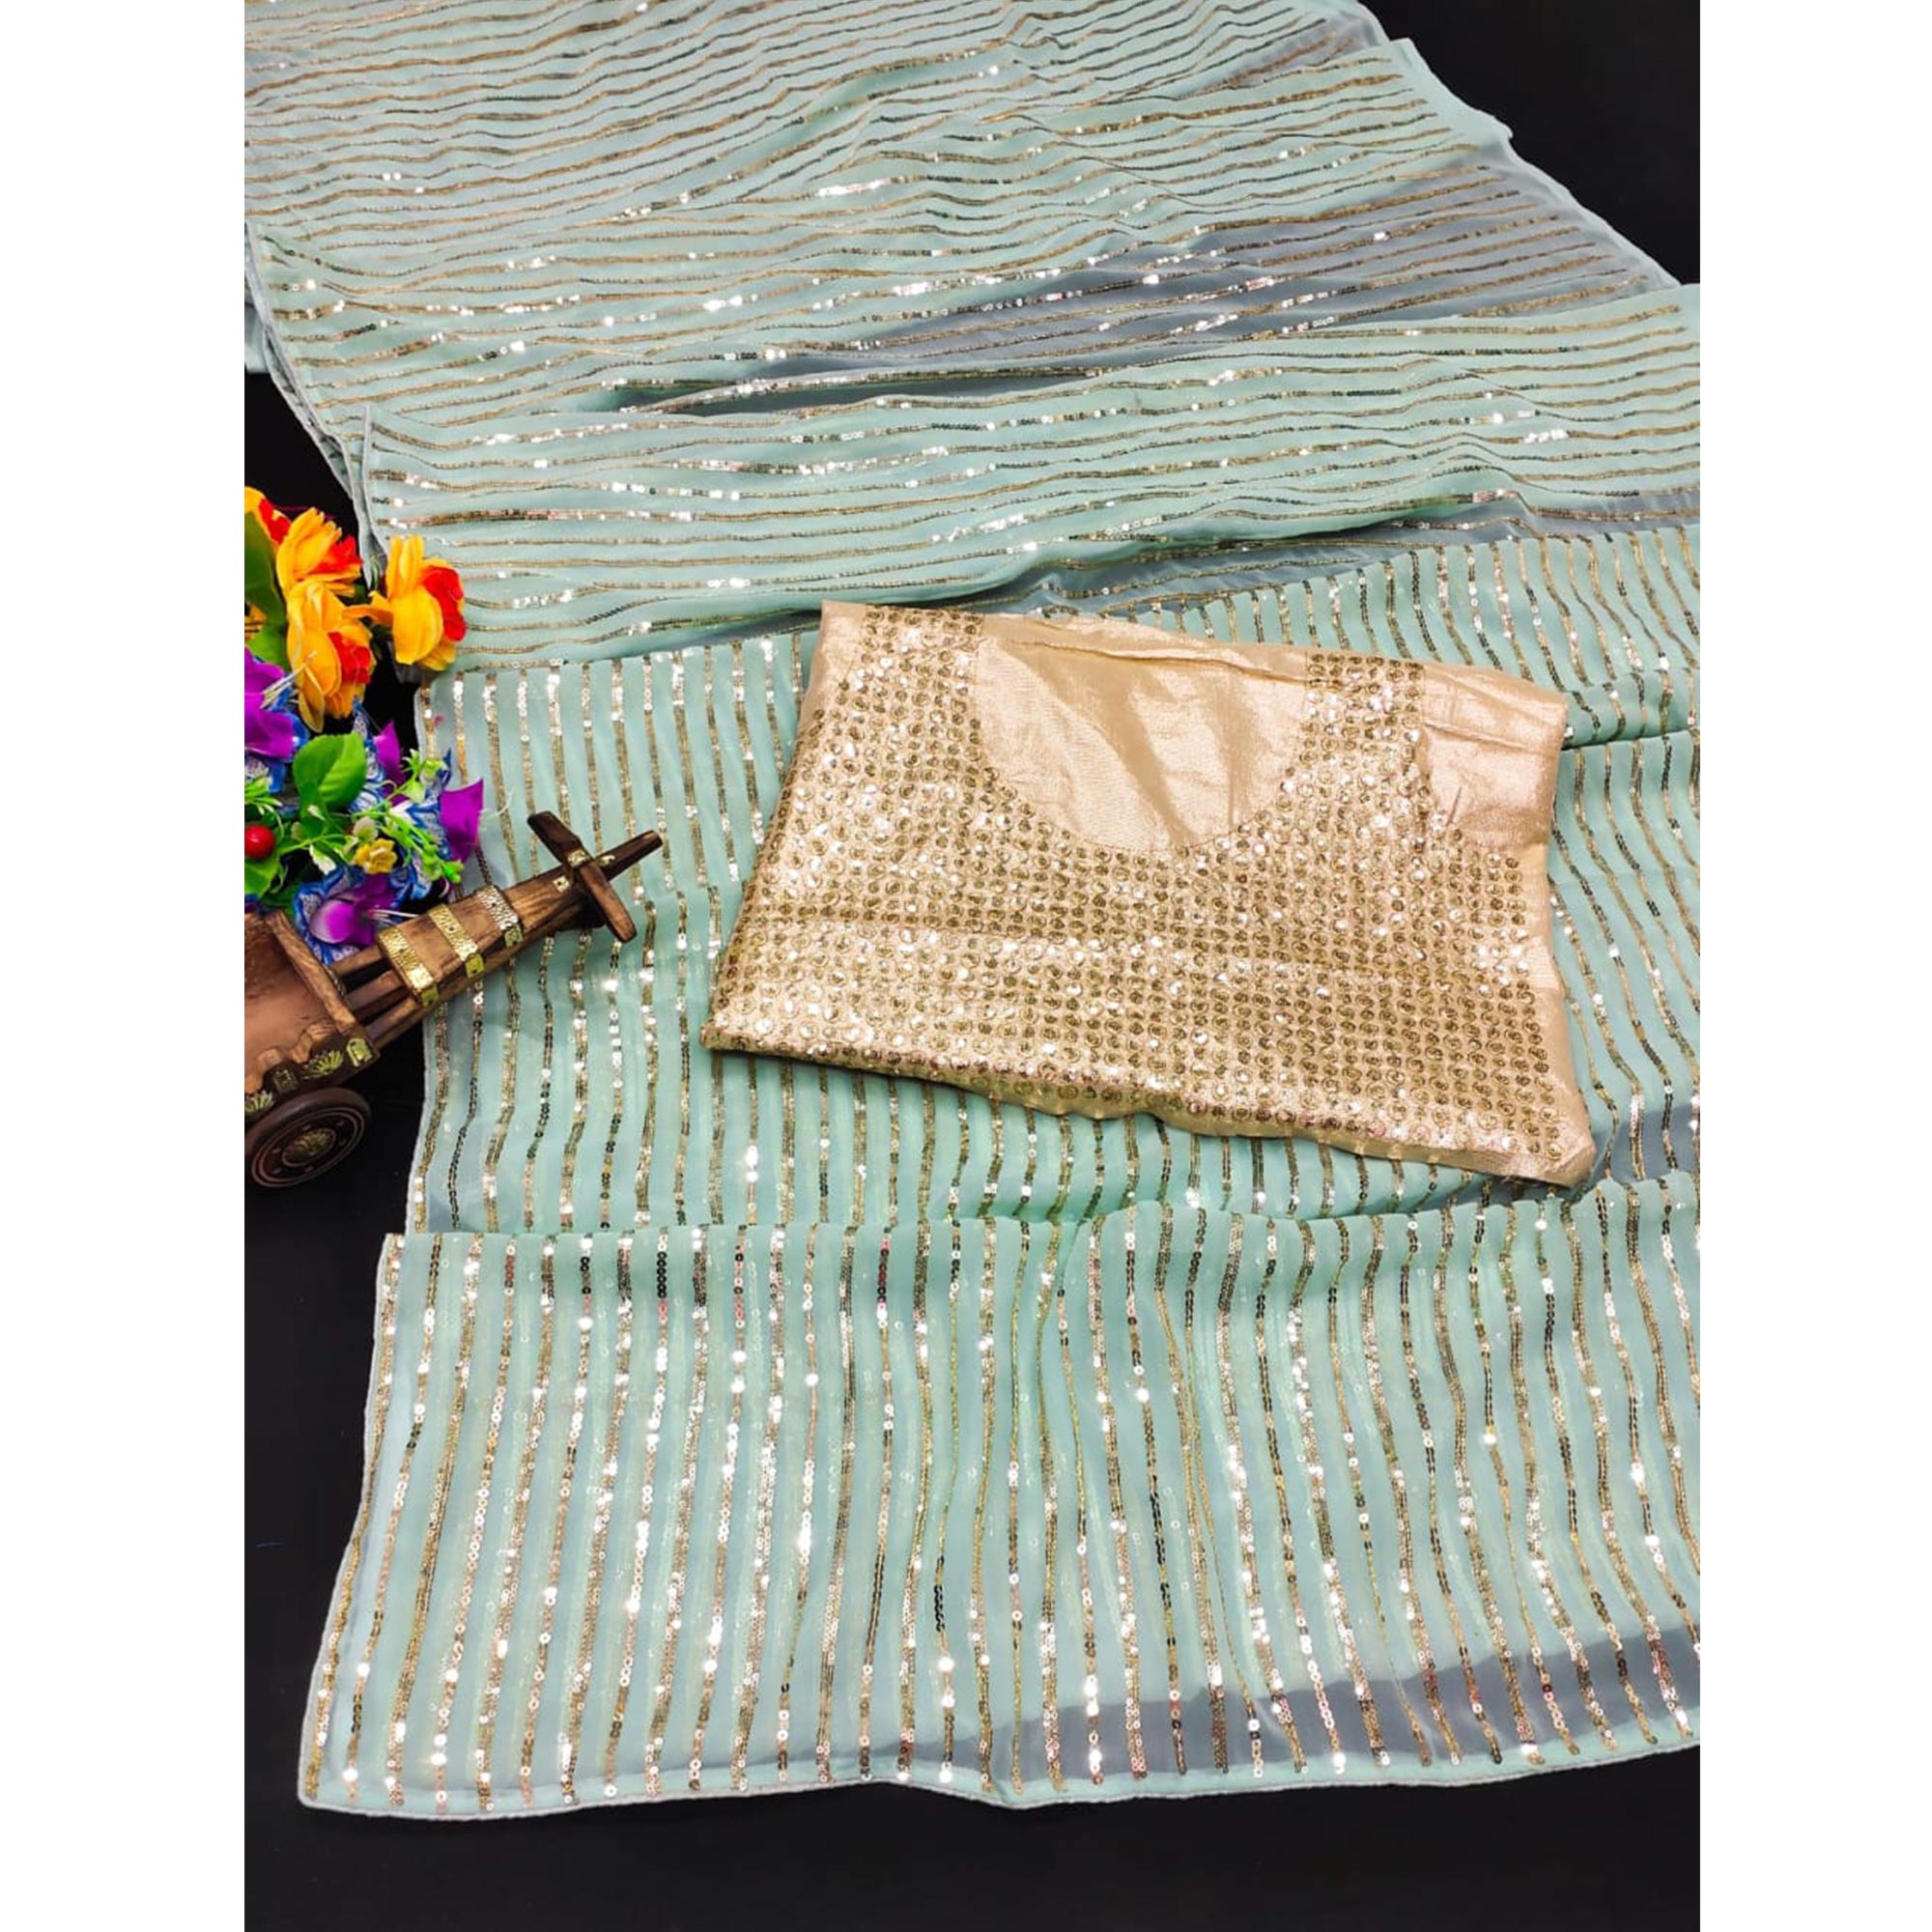 Sea Green Sequins Embroidered Georgette Saree